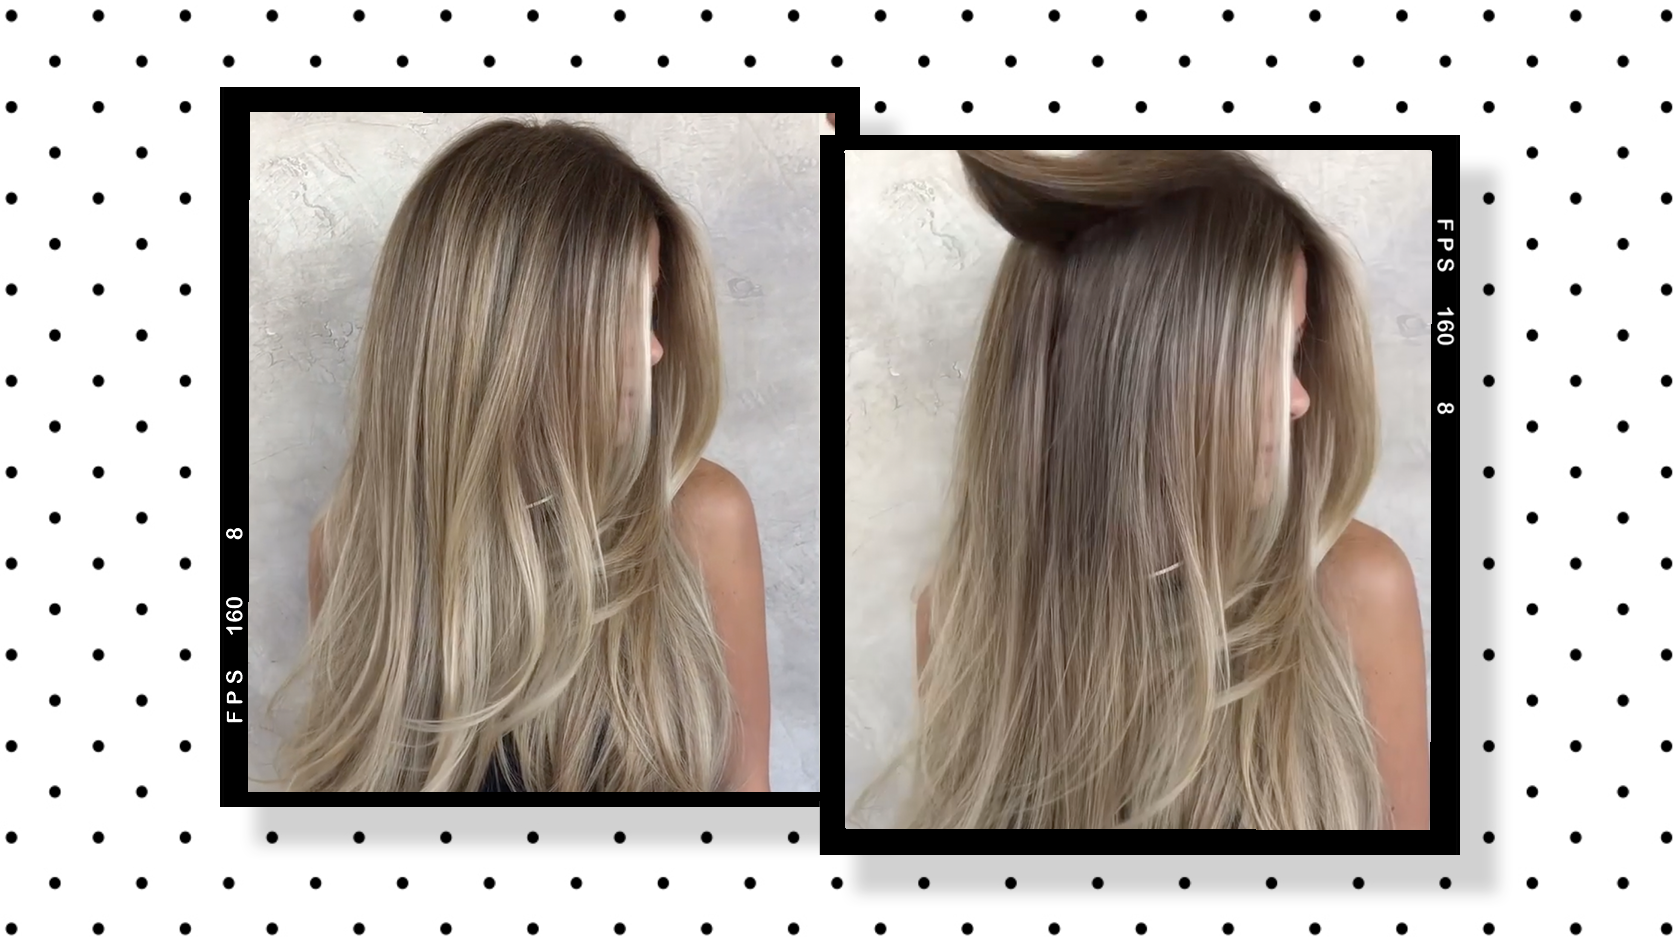 5. Balayage Techniques for Vanilla Blonde Hair - wide 3